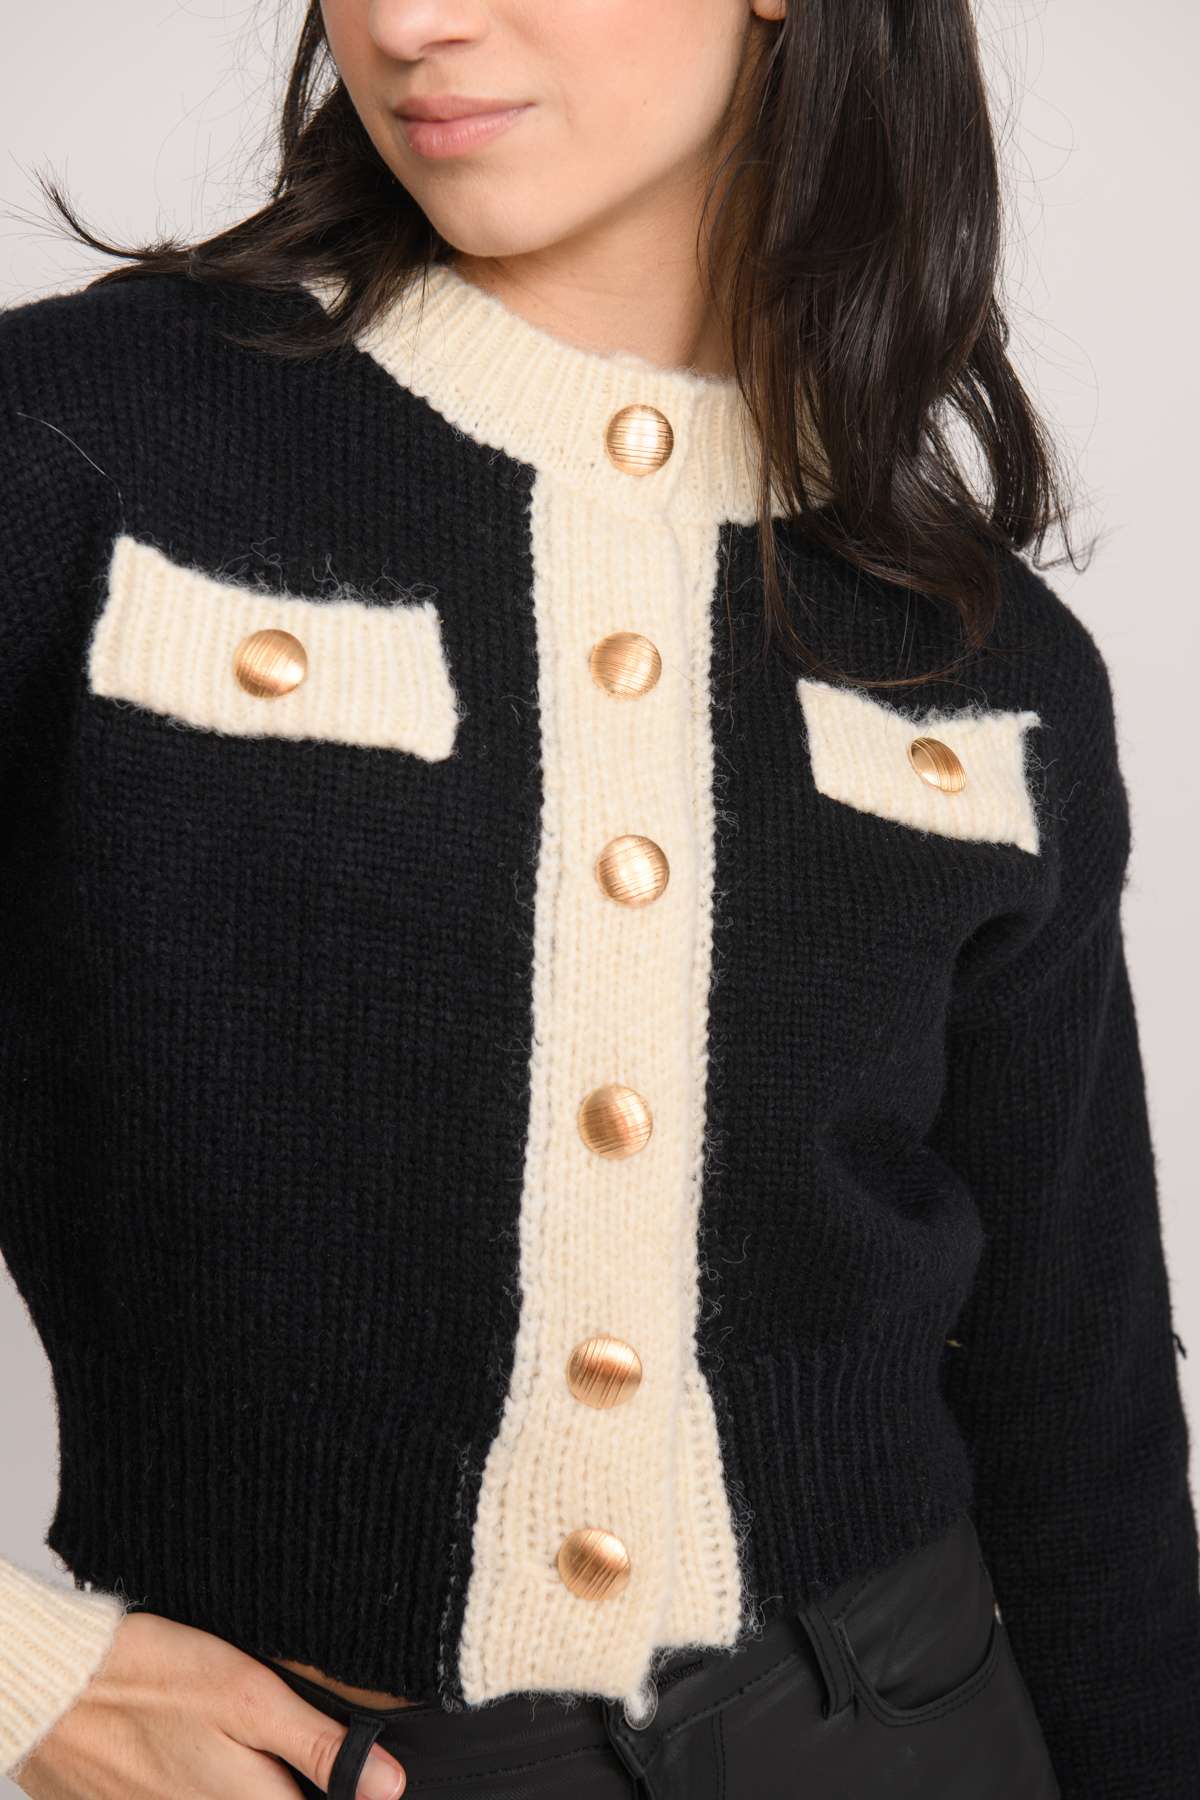 chanel style sweater xl